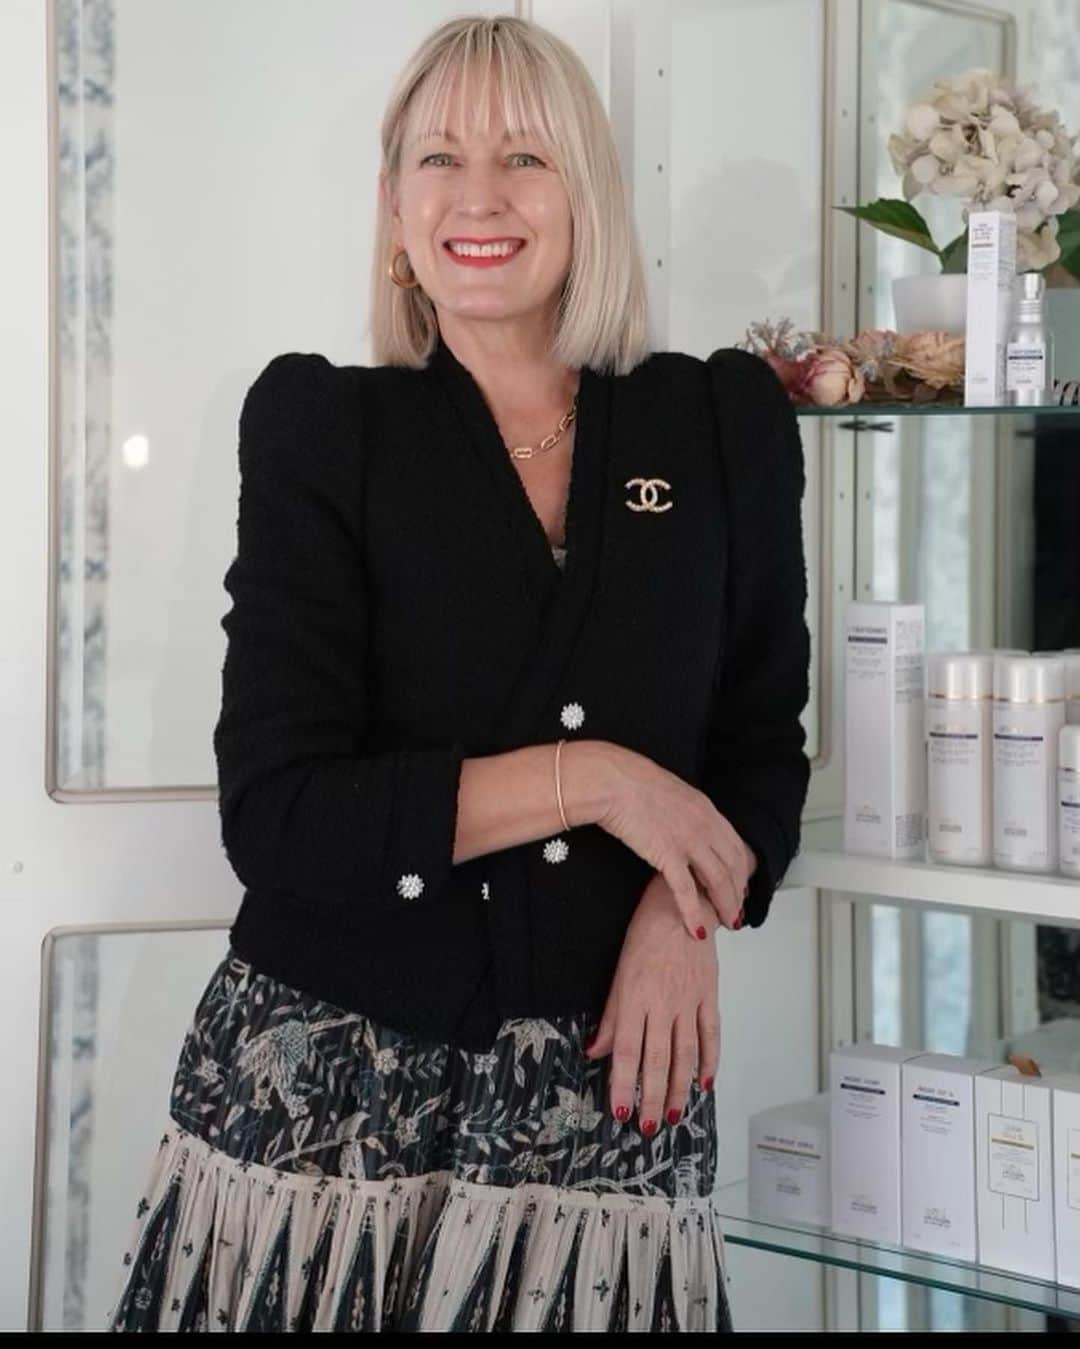 Biologique Recherche USAのインスタグラム：「Founded by Kimberly Carson in 2020, Colette Skin Studio is a French-inspired spa located in Scottsdale, Arizona ✨  With over 28 years of experience in esthetics, holistic skincare and wellness, Kimberly offers Biologique Recherche products and treatments exclusively.   Named after her daughter, Colette, @colette_skinstudio was built on the philosophy of Building Better Skin. After years of working on countless clients with compromised skin barriers after being subject to harsh skincare treatments, Kimberly discovered and chose the Biologique Recherche methodology to bring her clients’ skin back to life.    Kimberly believes that hands are the best tools and that anyone with a healthy, balanced lifestyle that incorporates healing facials and a customized skincare regimen can have the skin of their dreams.   Experience our VIP O2✨treatment at Colette Skin Studio, our oxygenating and anti-pollution micro-massage treatment to detoxify and stimulate the skin for a radiant complexion.   We are proud to partner with you, @colette_skinstudio 🤍  📸: @maxqcarson   #BiologiqueRecherche #FollowYourSkinInstant #BuildingBetterSkin #BRspa #Scottsdale #wellnesswithBR #coletteskinstudio」